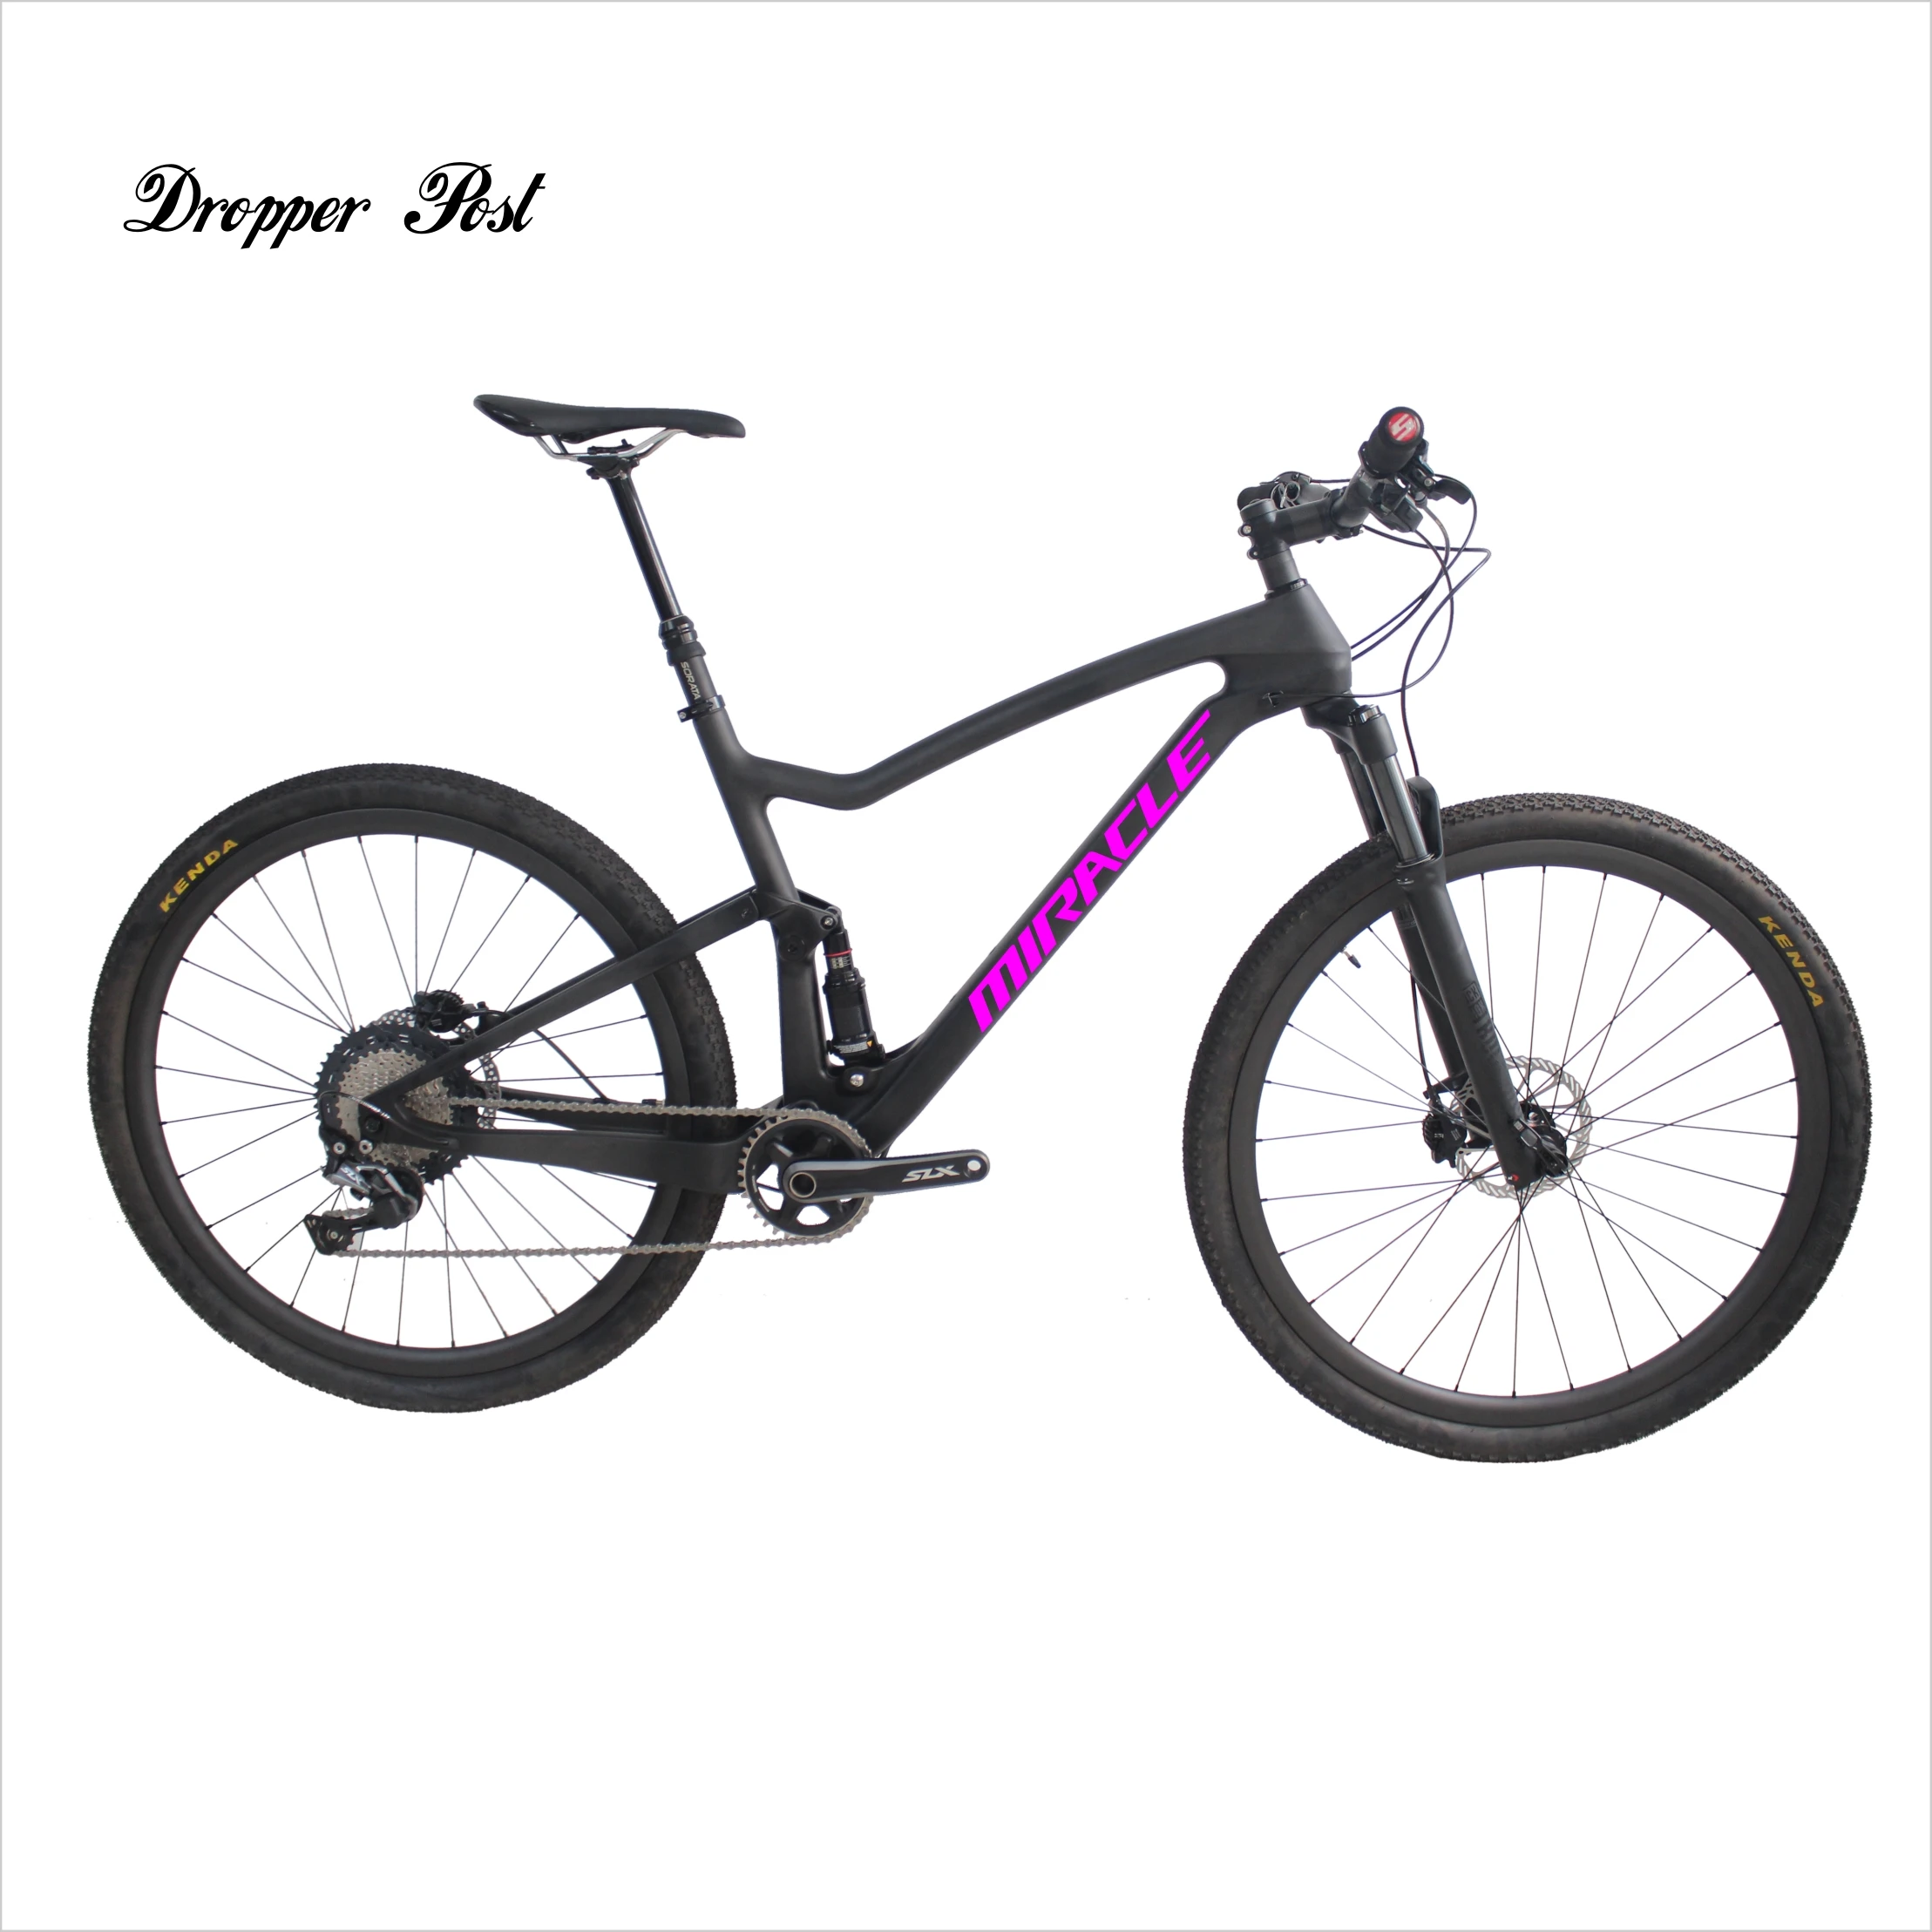 

2021 new 12 speed 29er BOOST suspension carbon bikes dropper post RECON 120mm travel fork,carbon wheelset and SLX M7100 groupset